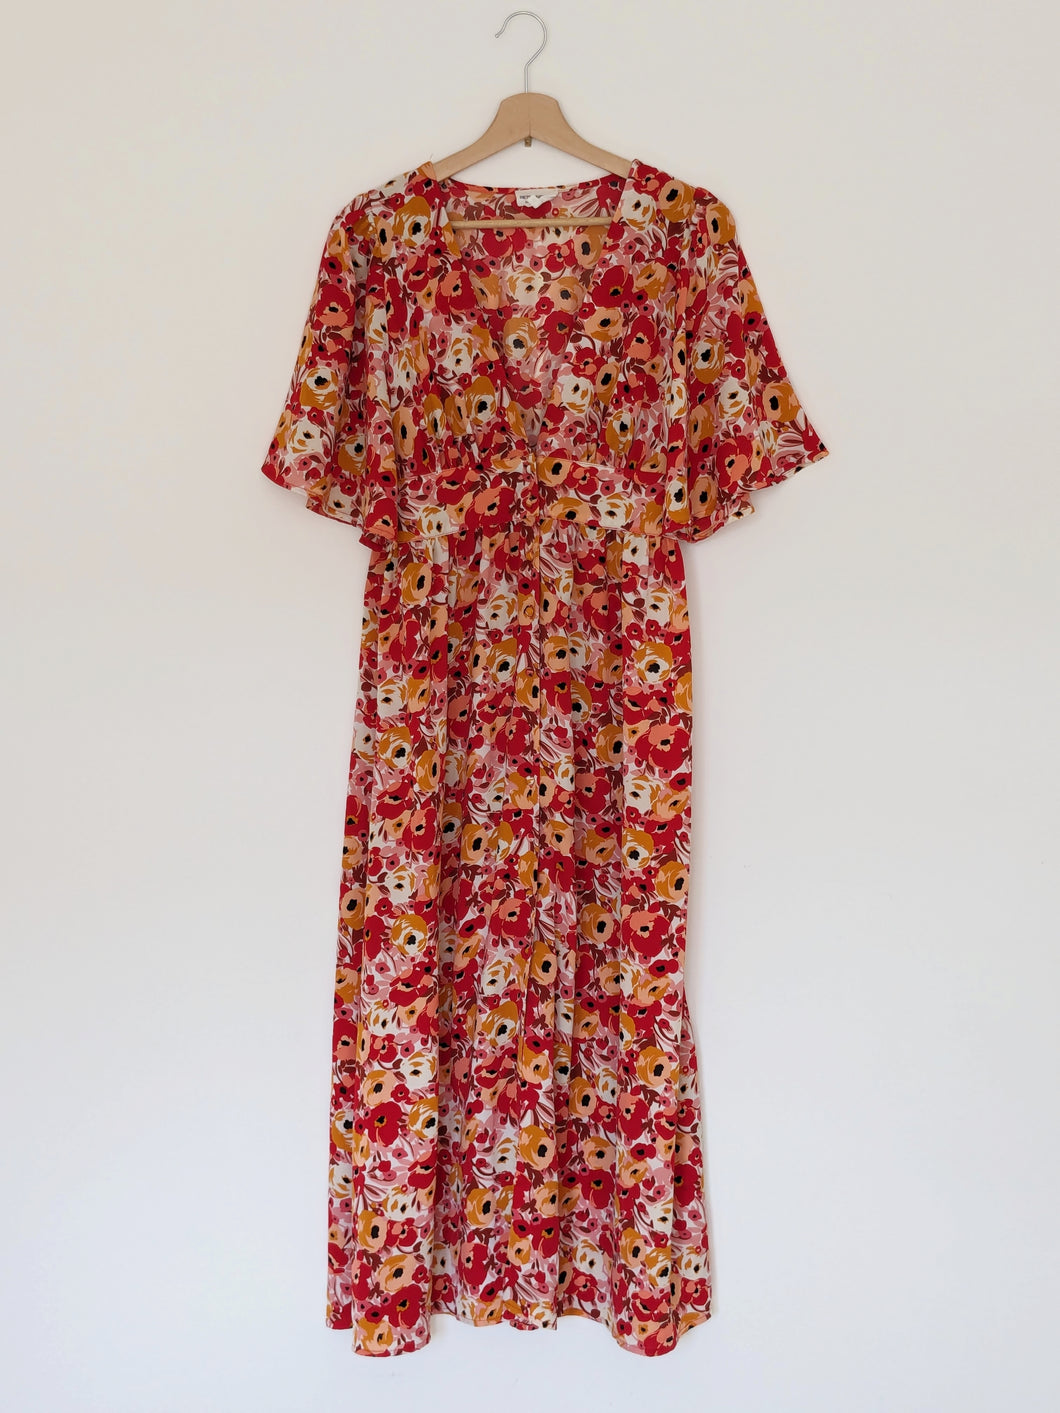 Red Floral Maxi Dress. Size 12